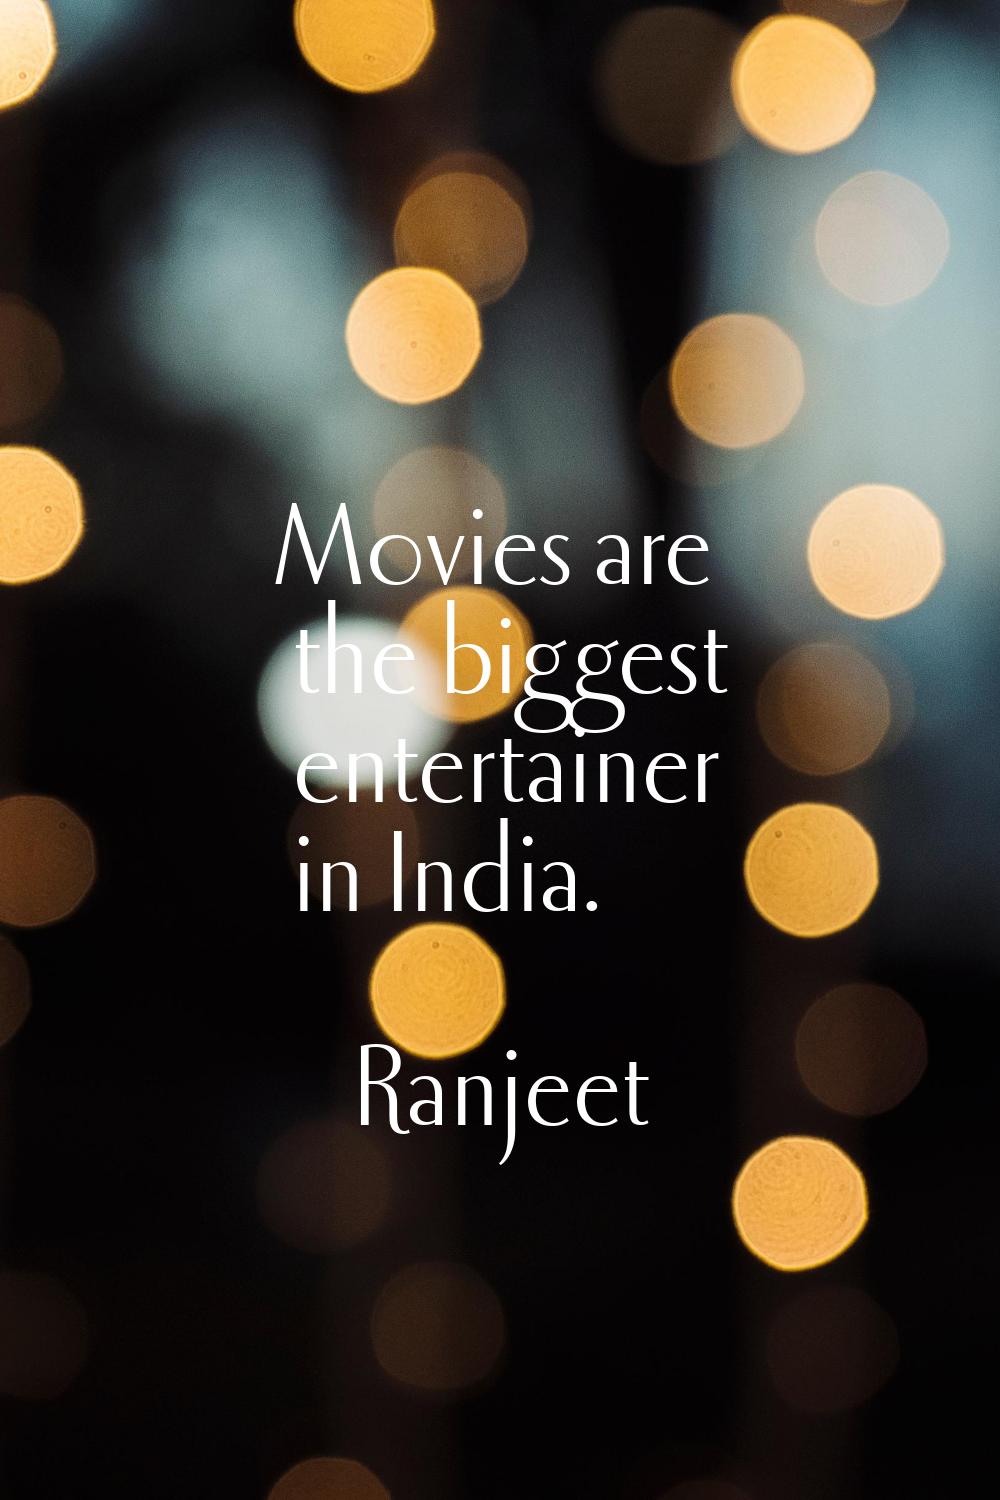 Movies are the biggest entertainer in India.